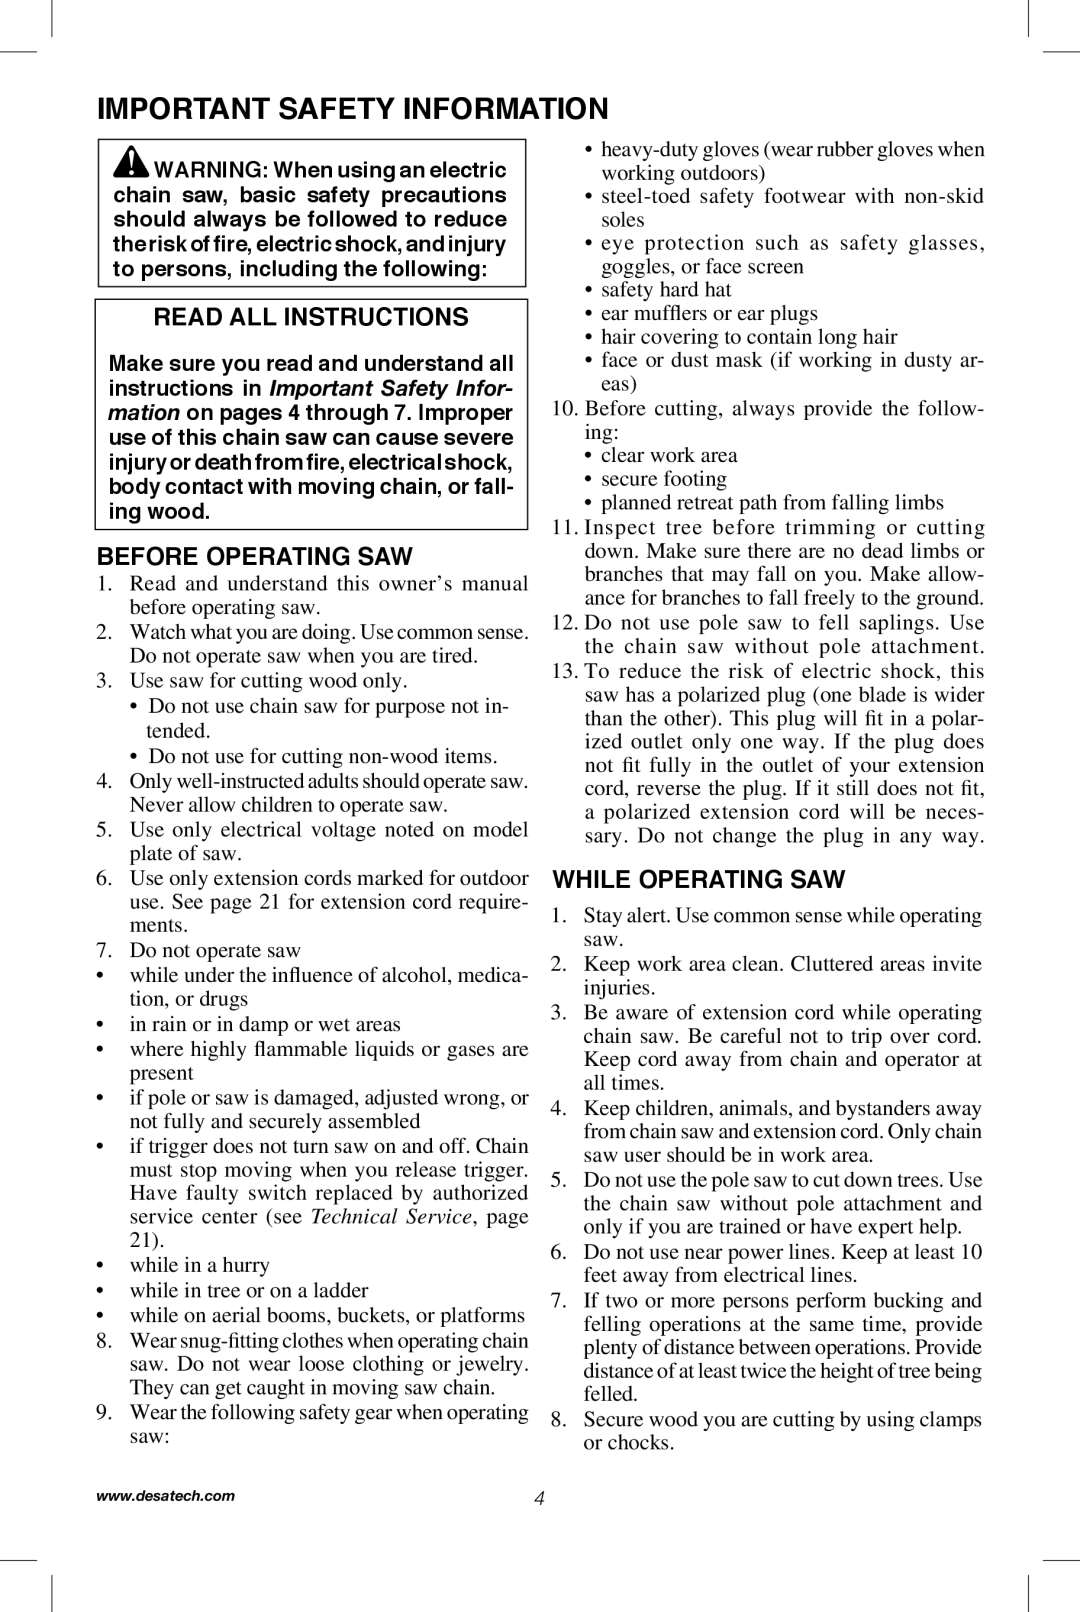 Remington Power Tools RPS2N1, 104317, PS1510A Important Safety Information, Read All Instructions, Before Operating Saw 